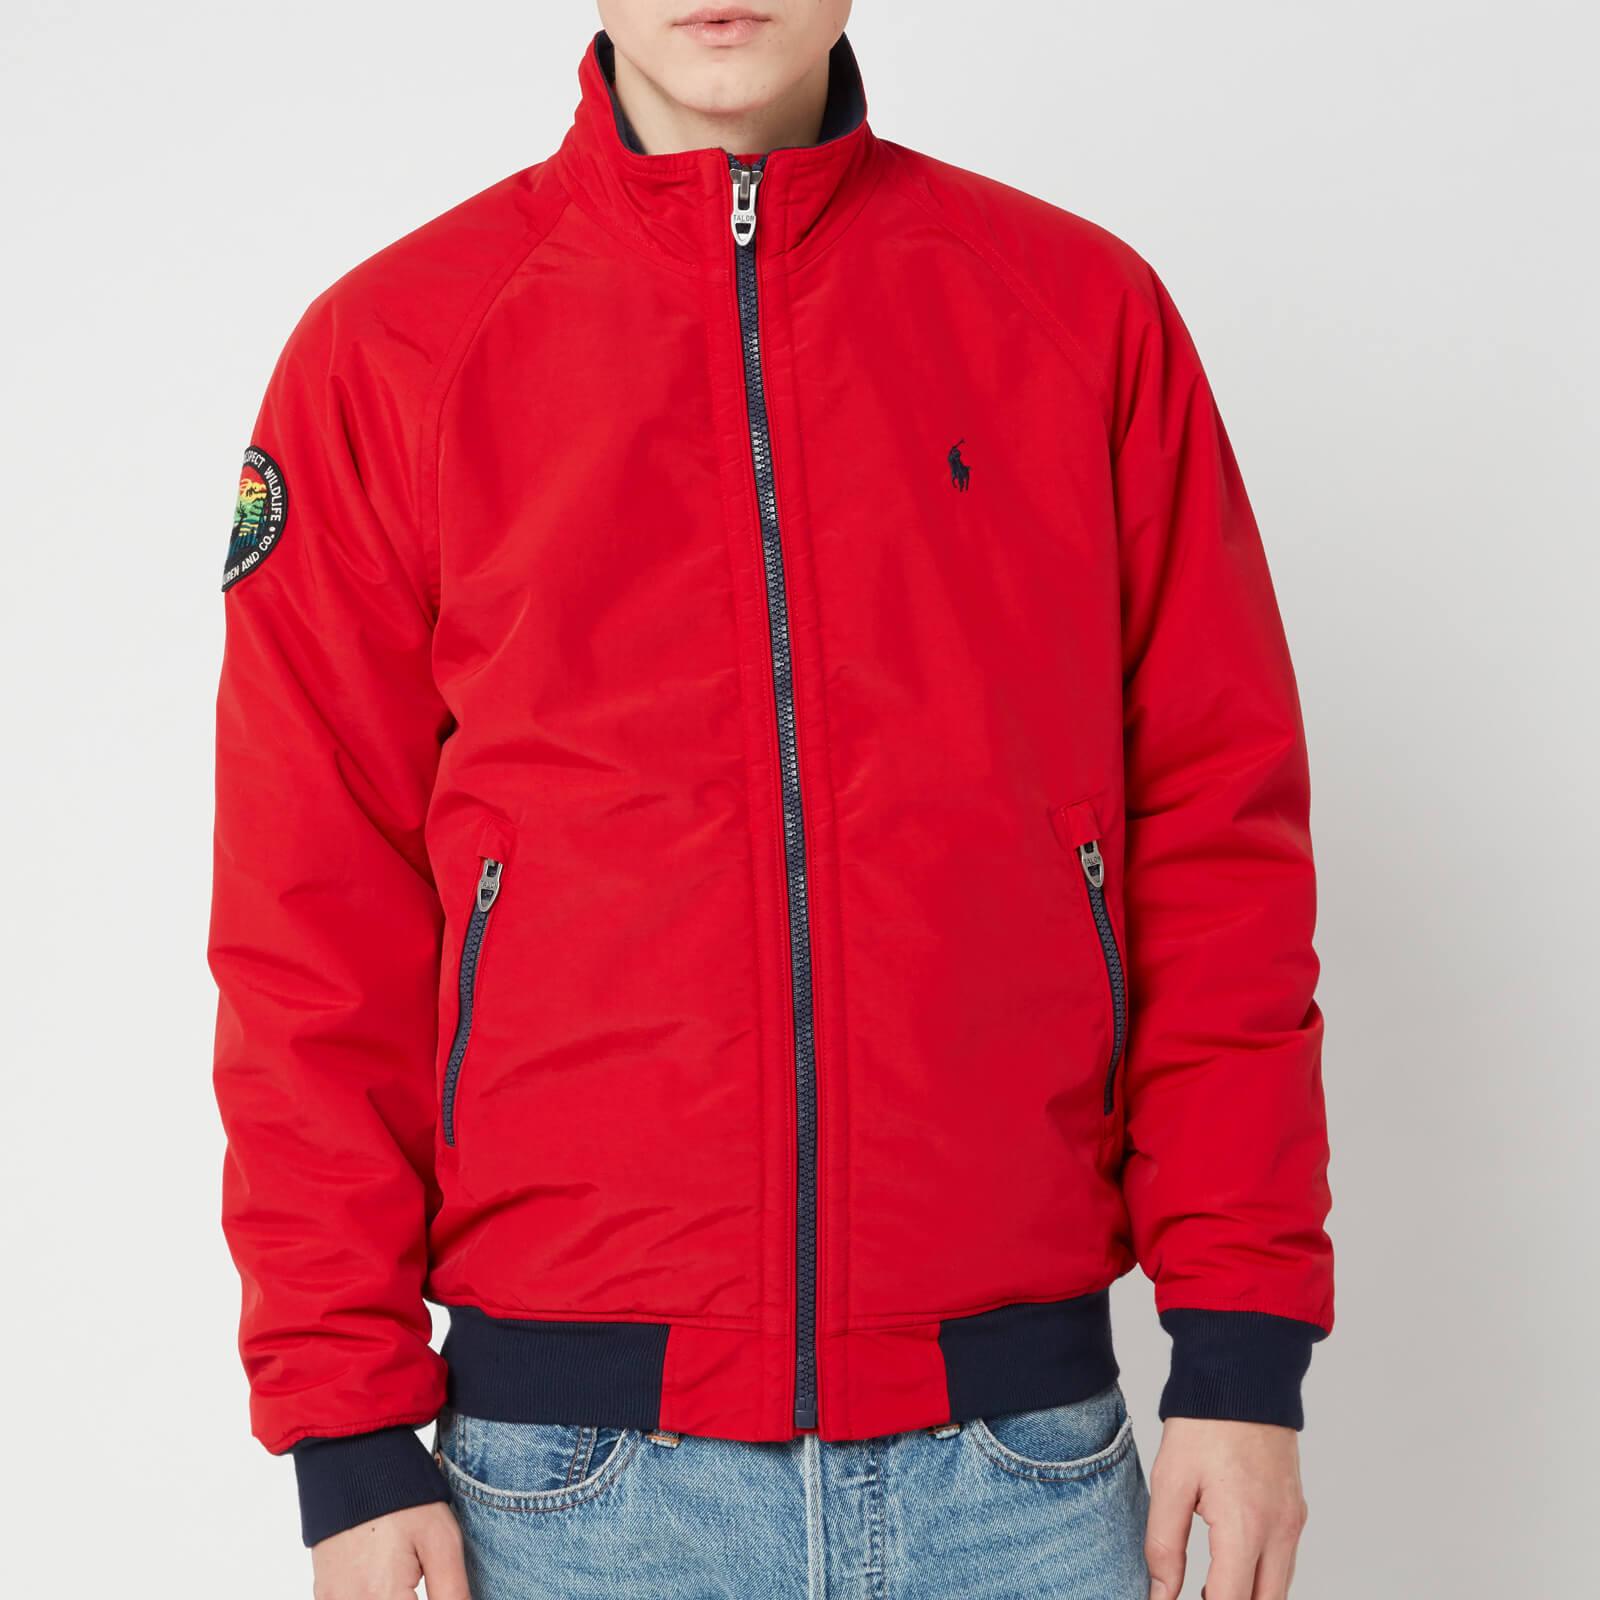 polo red bomber jacket